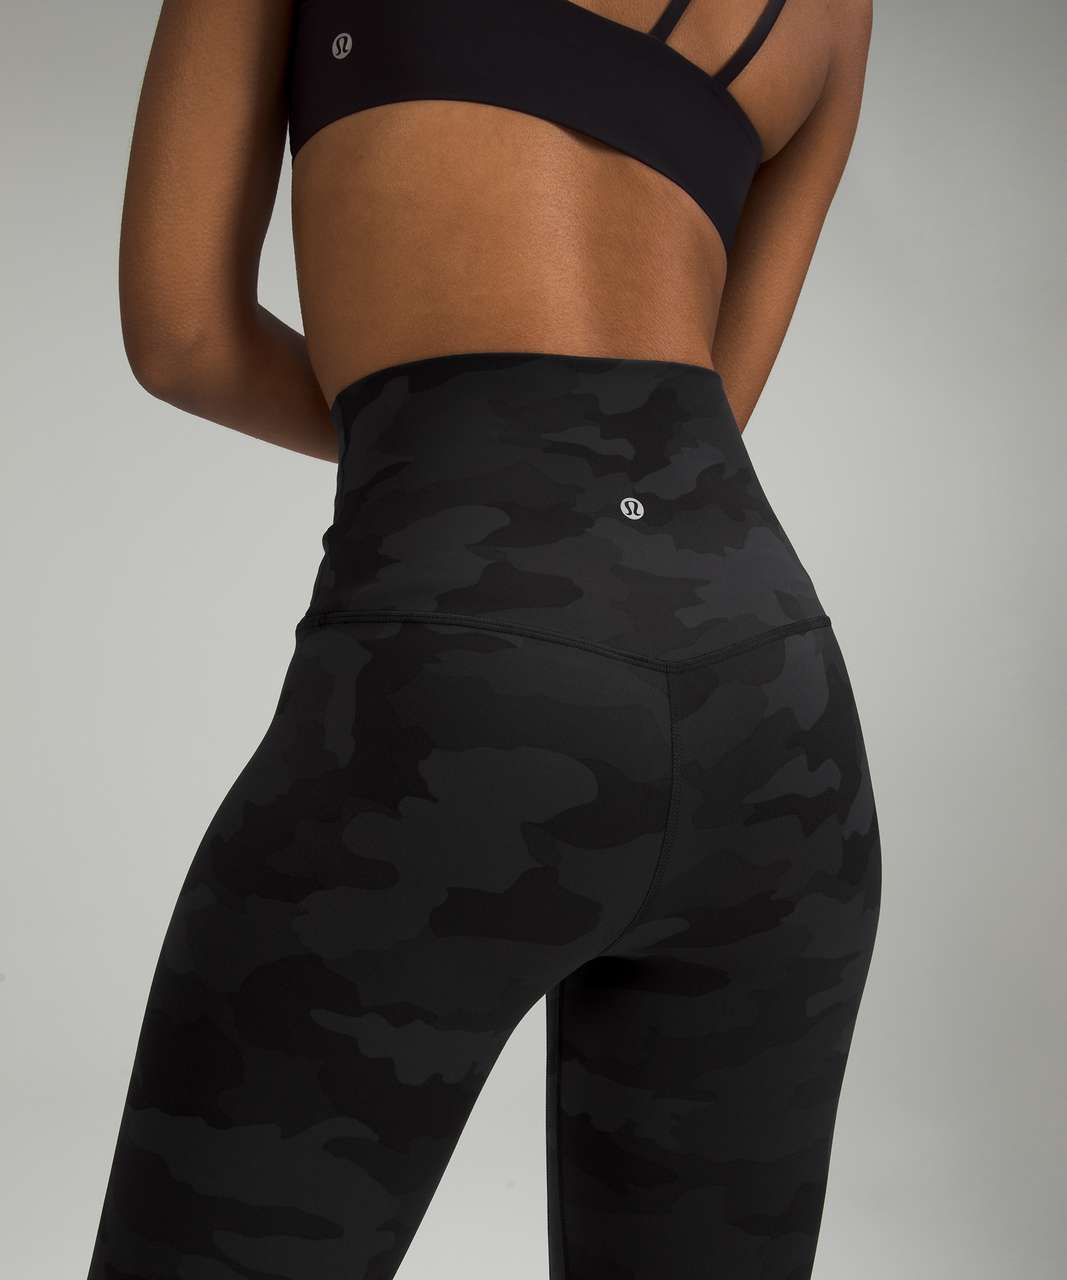 Lululemon Ruched Cropped Leggings Camo Size 2 - $36 - From Karma